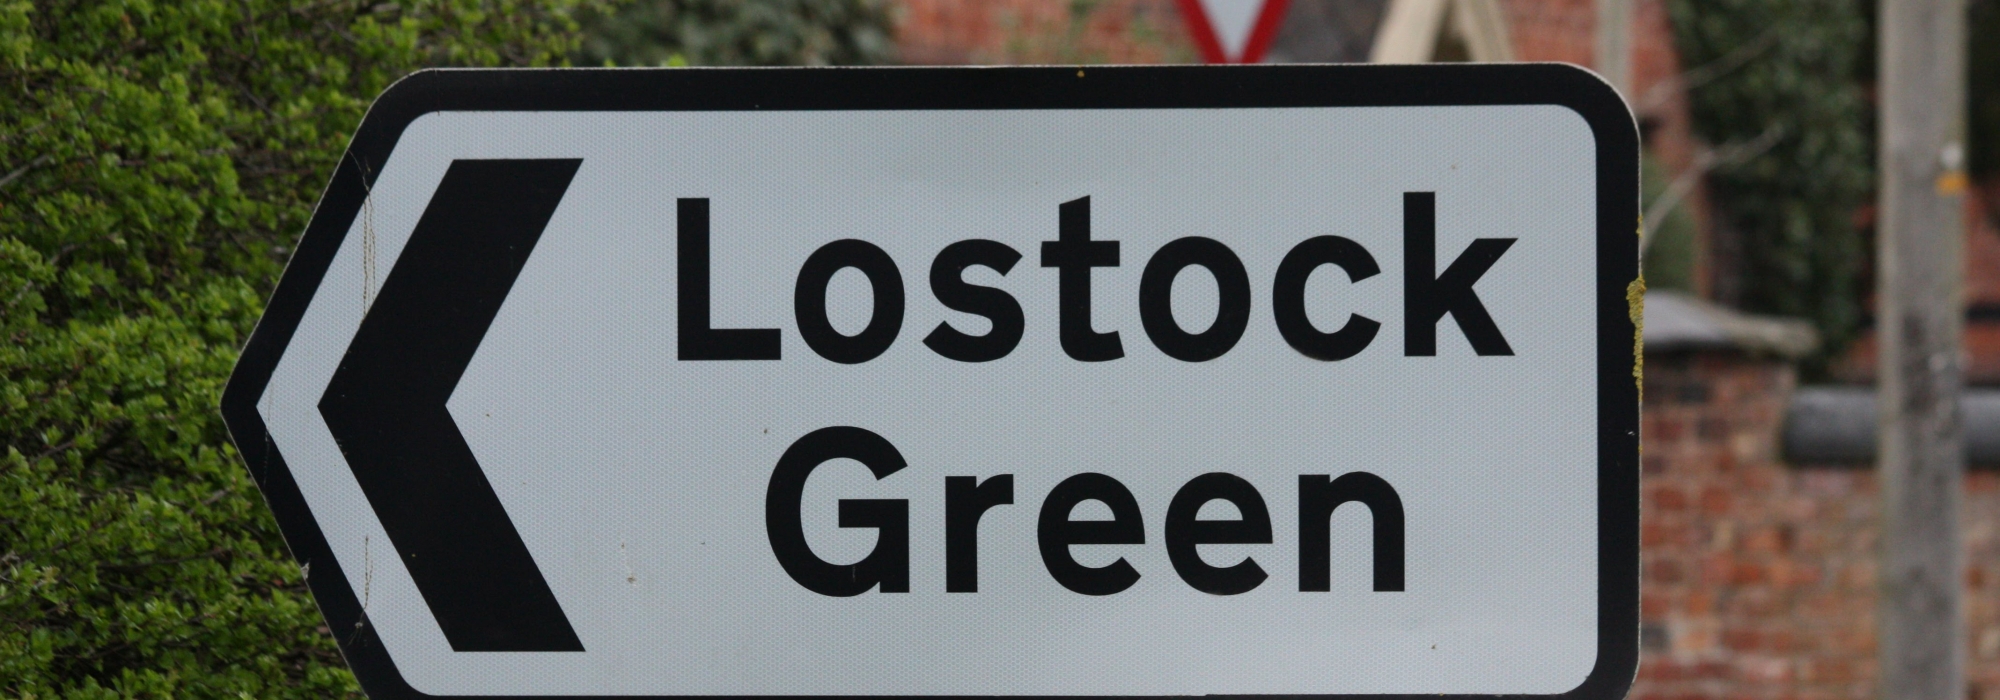 Lostock Green Road Sign pointing right